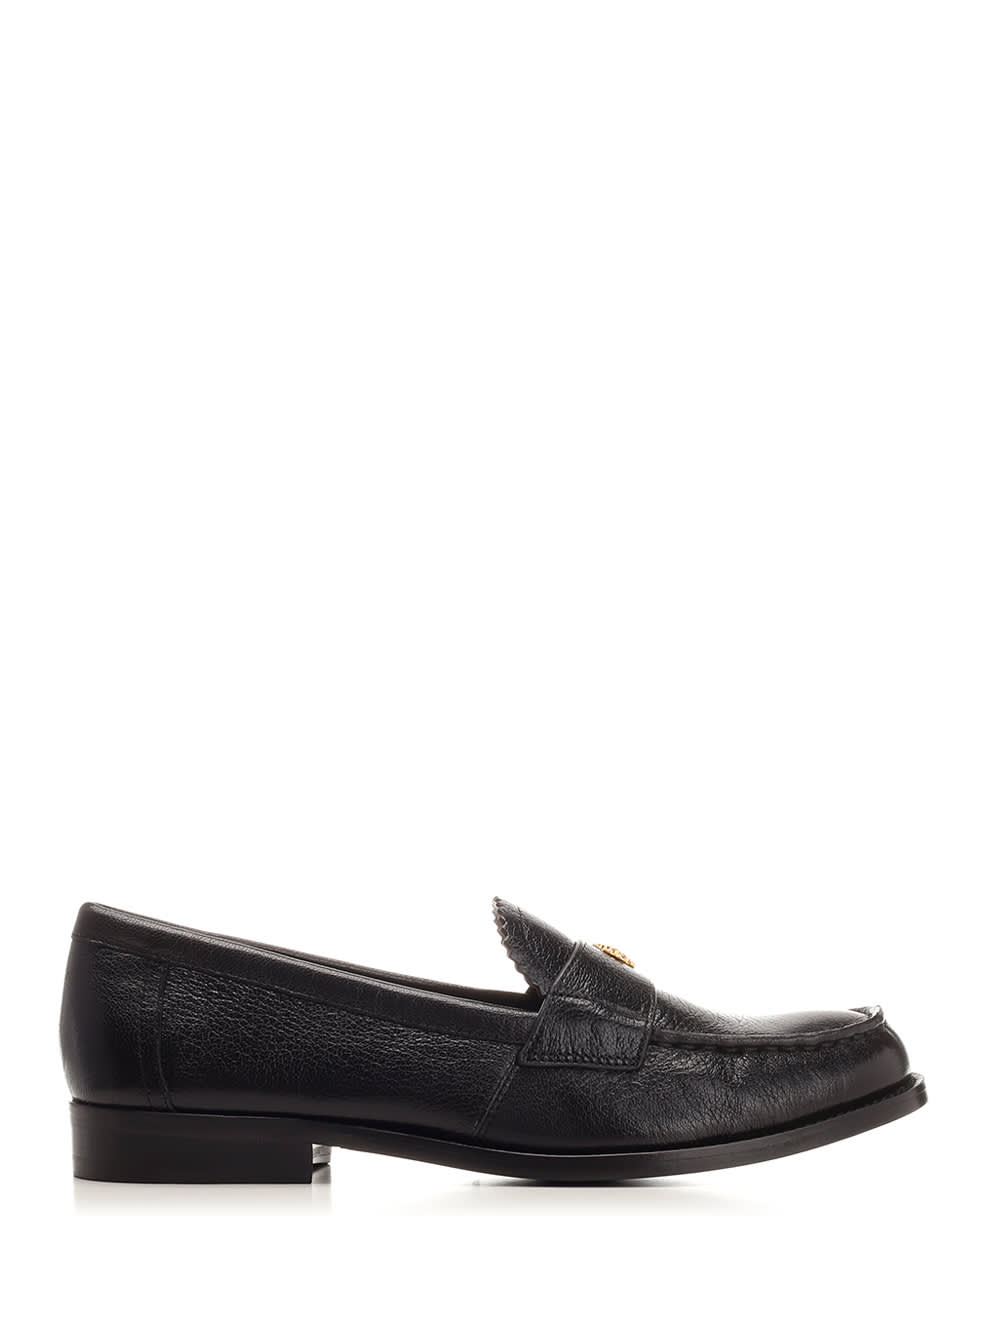 Tory Burch Perry Loafer Flat Shoes In Black